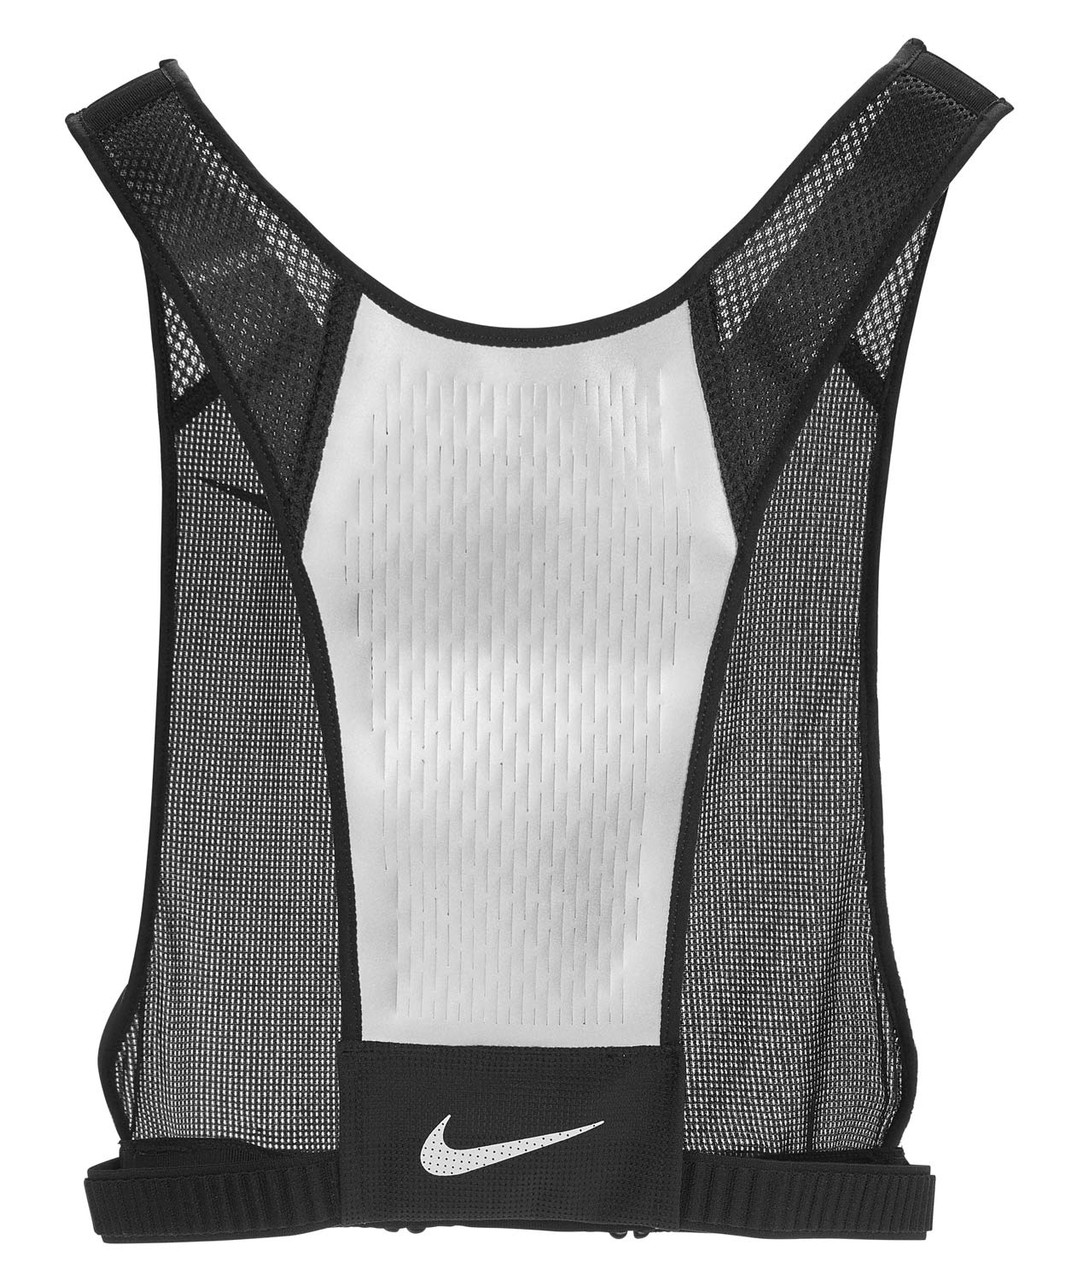 Nike Ditches Safety Pins, Gives the Runner's Bib a Much-Needed